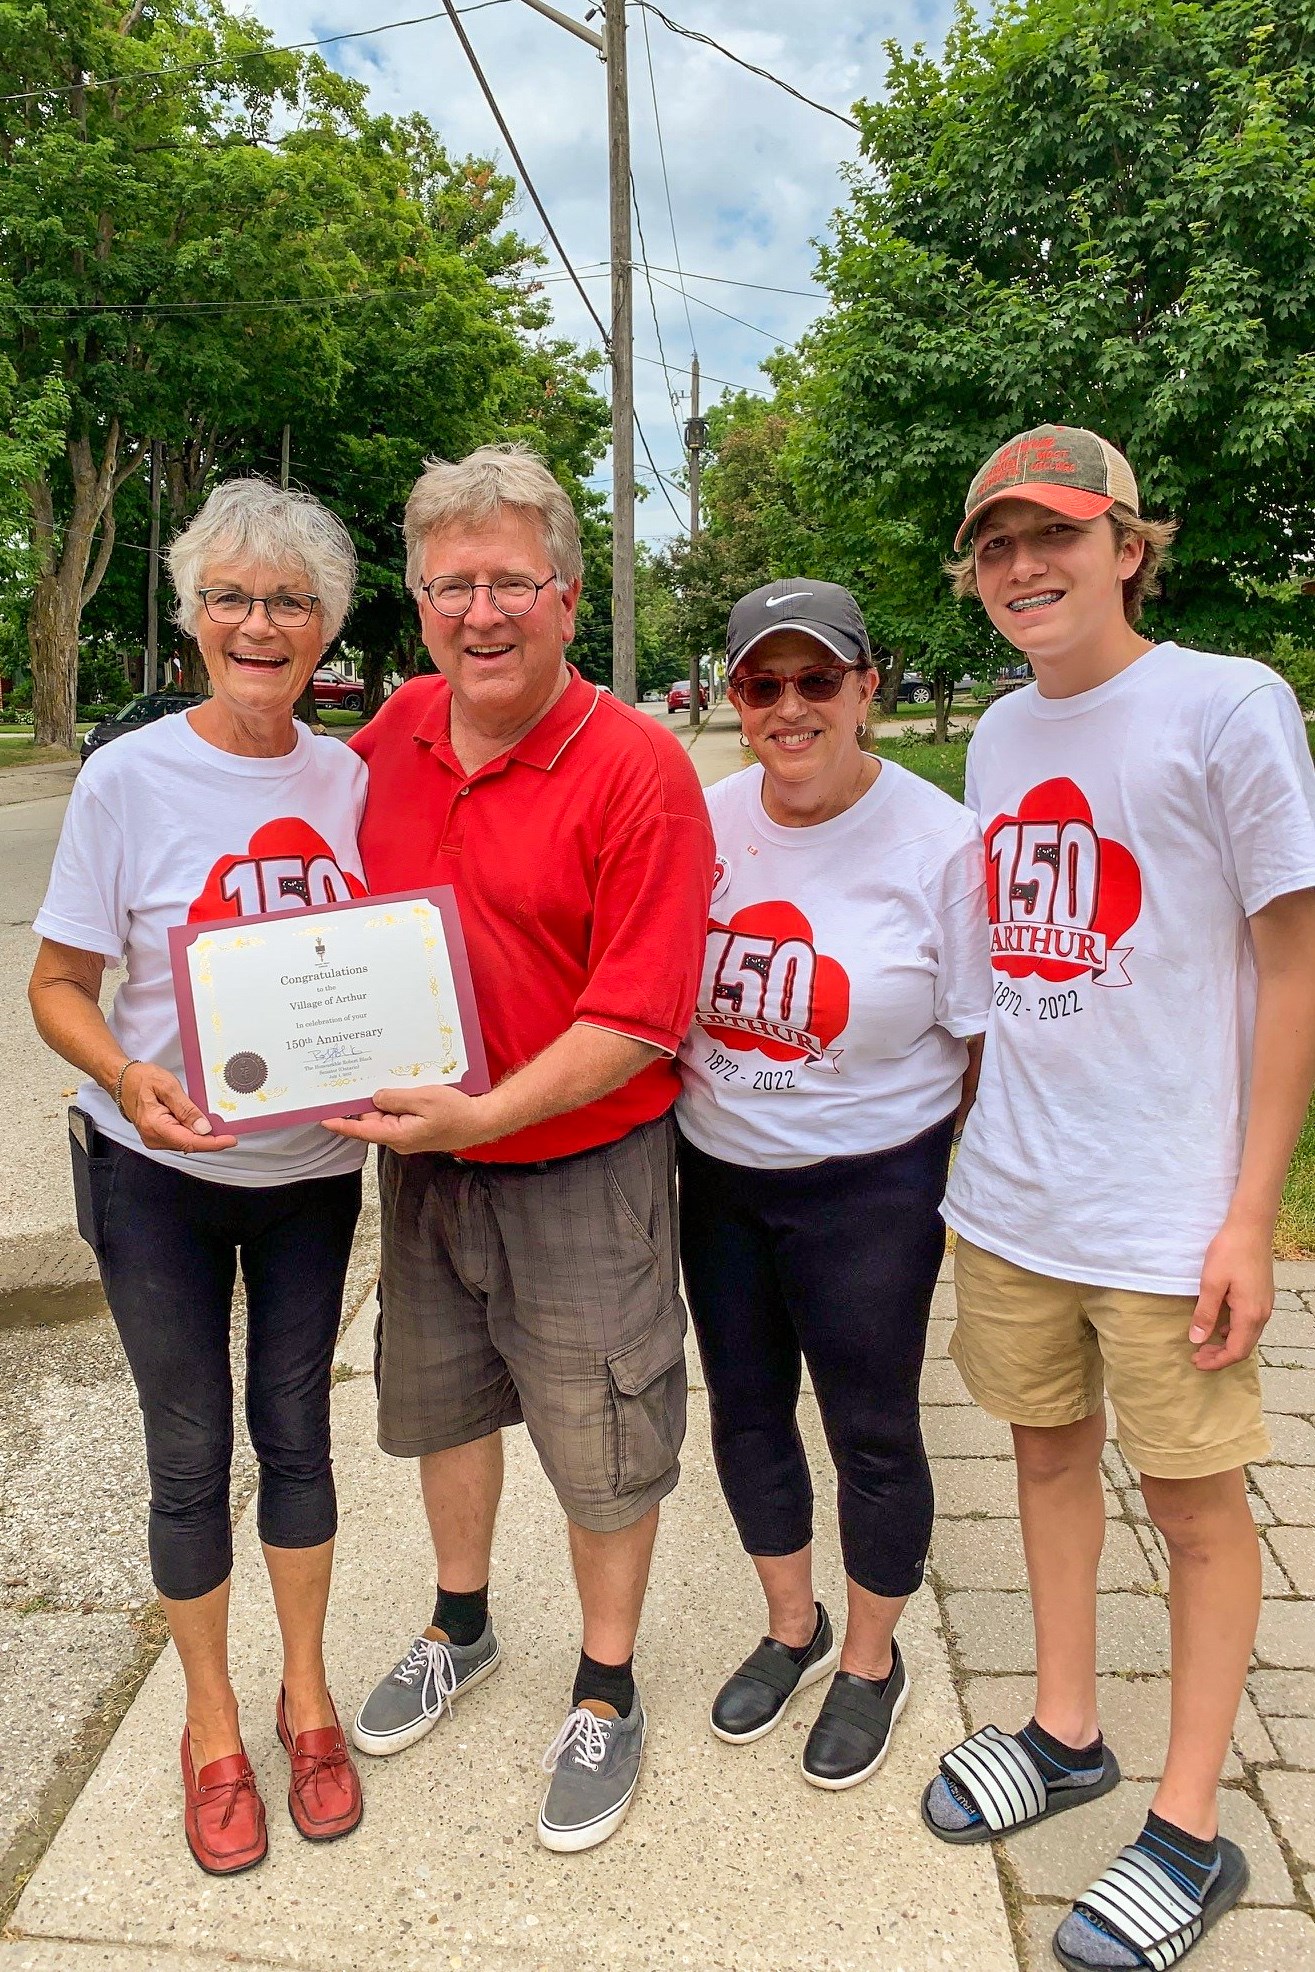 Friday, July 1, 2022 – Senator Rob Black presents a certificate of congratulations to Faye Craig, chair of the committee that planned the 150th anniversary celebrations for the community of Arthur in Wellington County, Ontario.